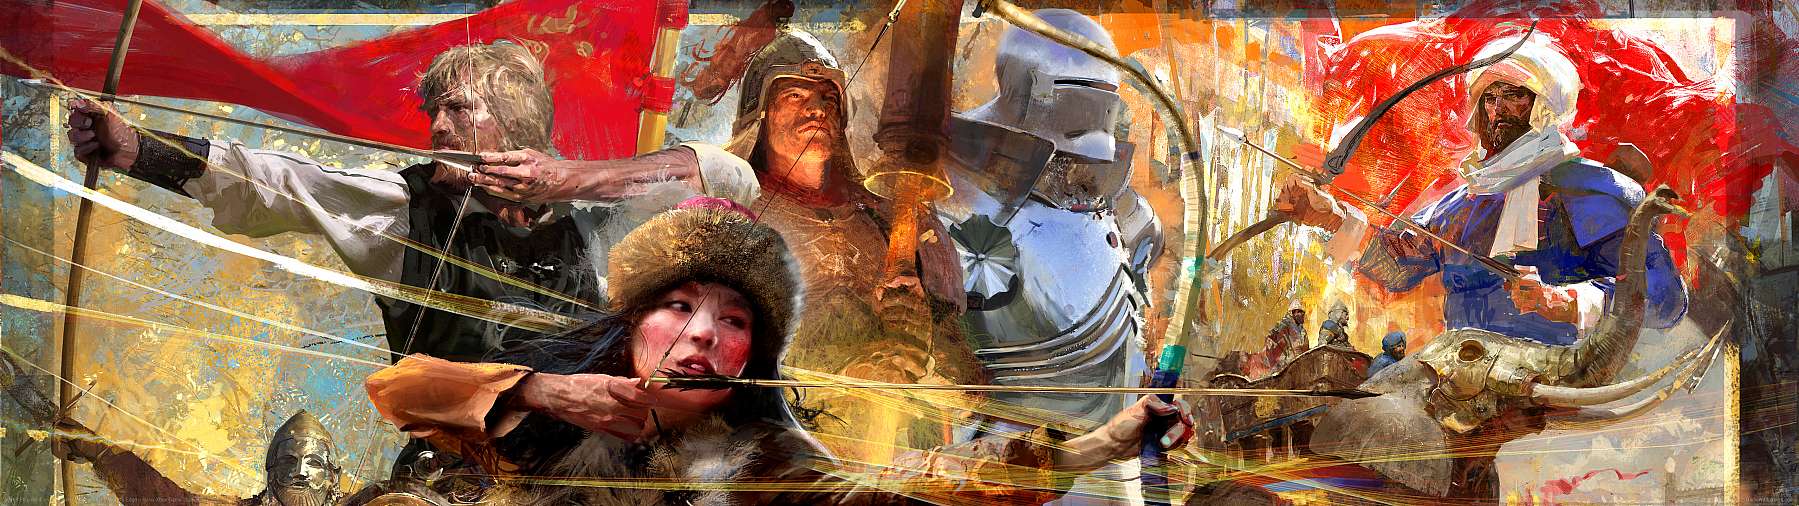 Age of Empires 4 superwide achtergrond 02